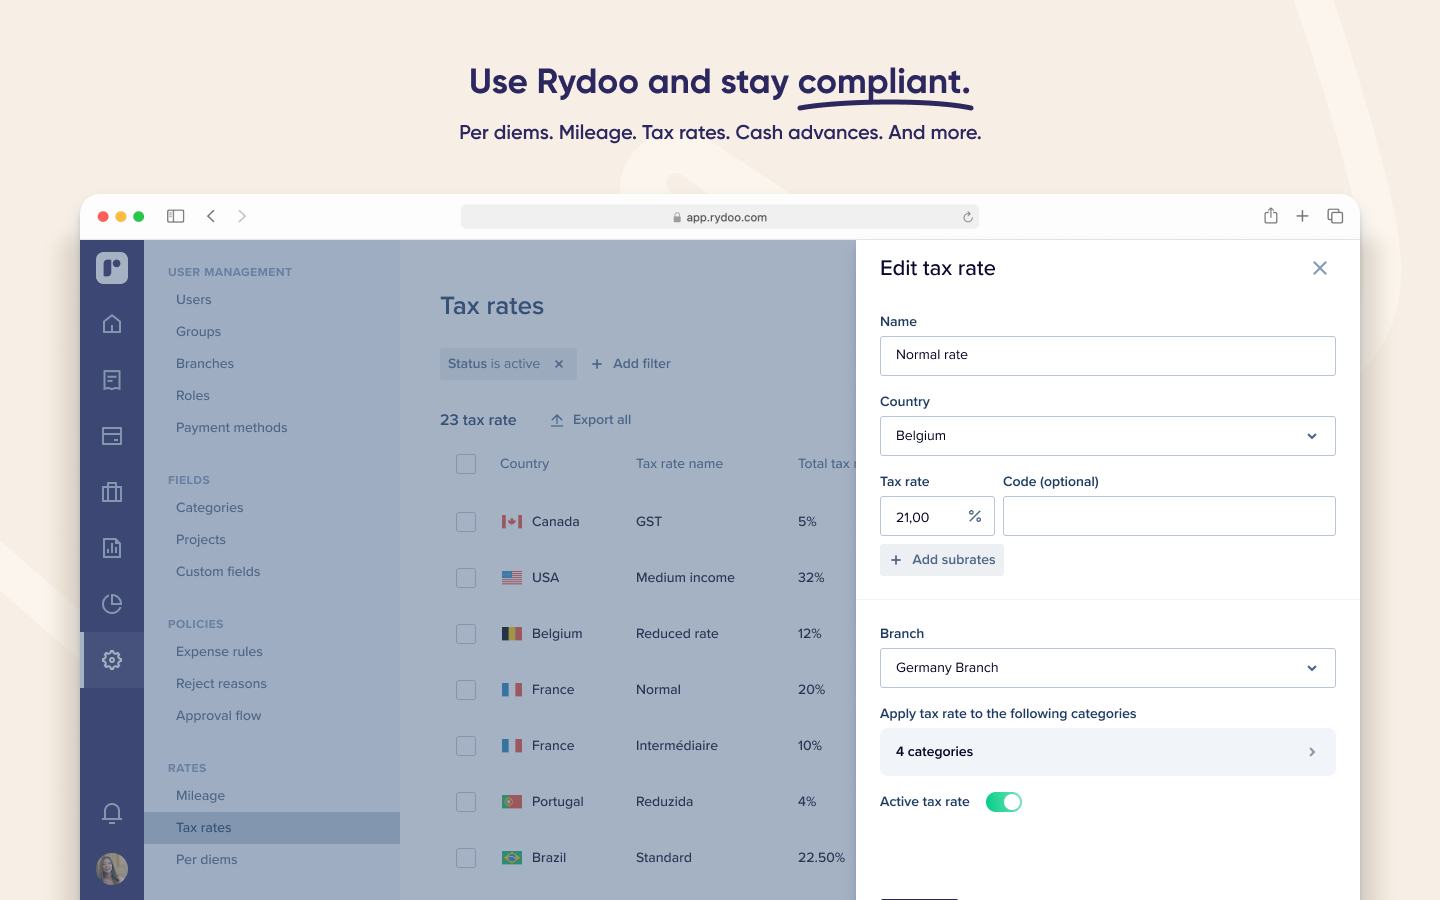 Rydoo - Use Rydoo and stay compliant: Per diems, mileage, tax rates, cash advances and more.